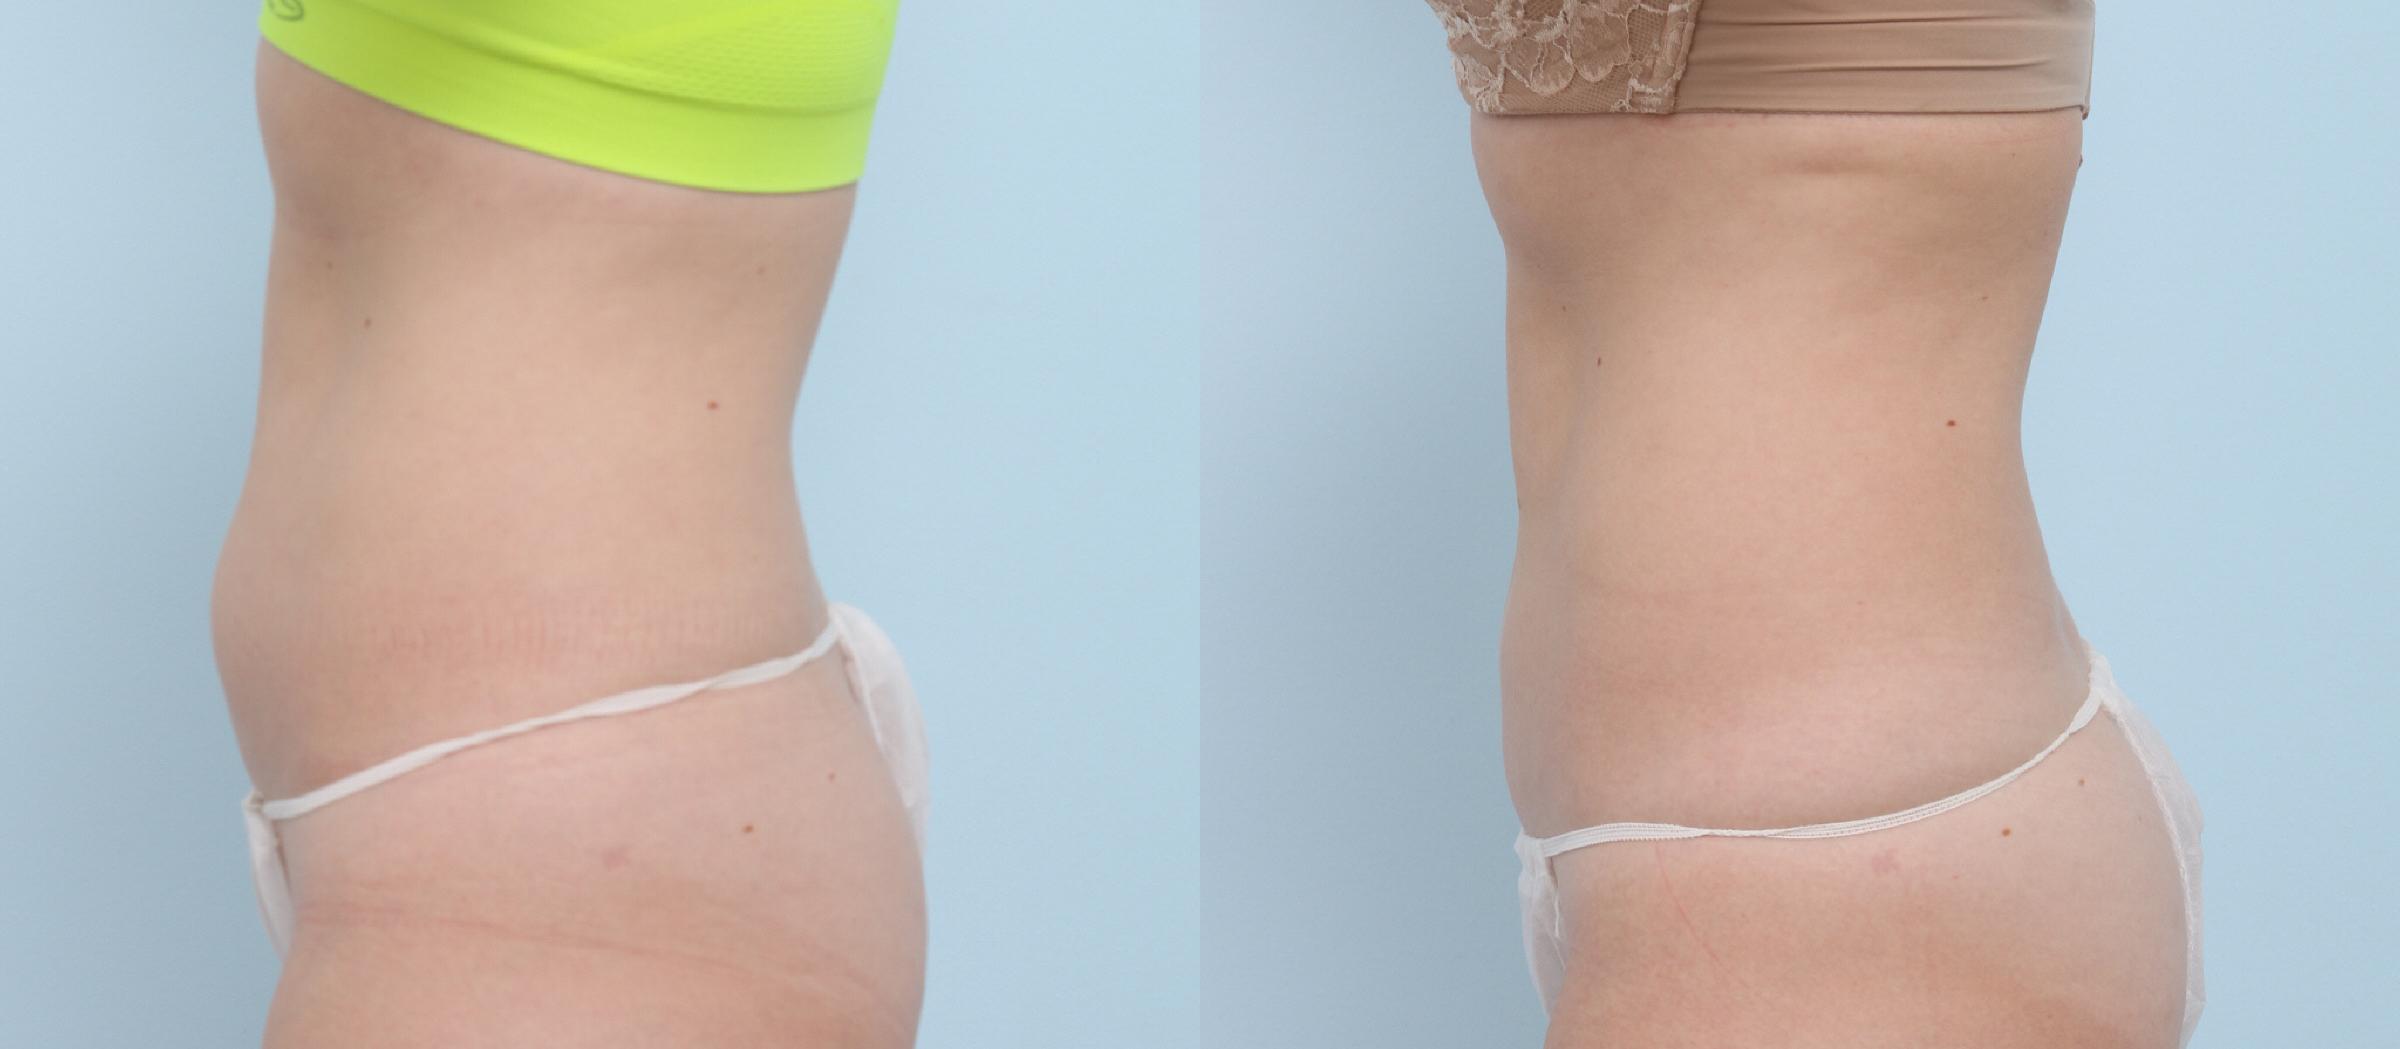  before and after pictures in , , 5 CoolSculpting Myths About Noninvasive Fat Reduction